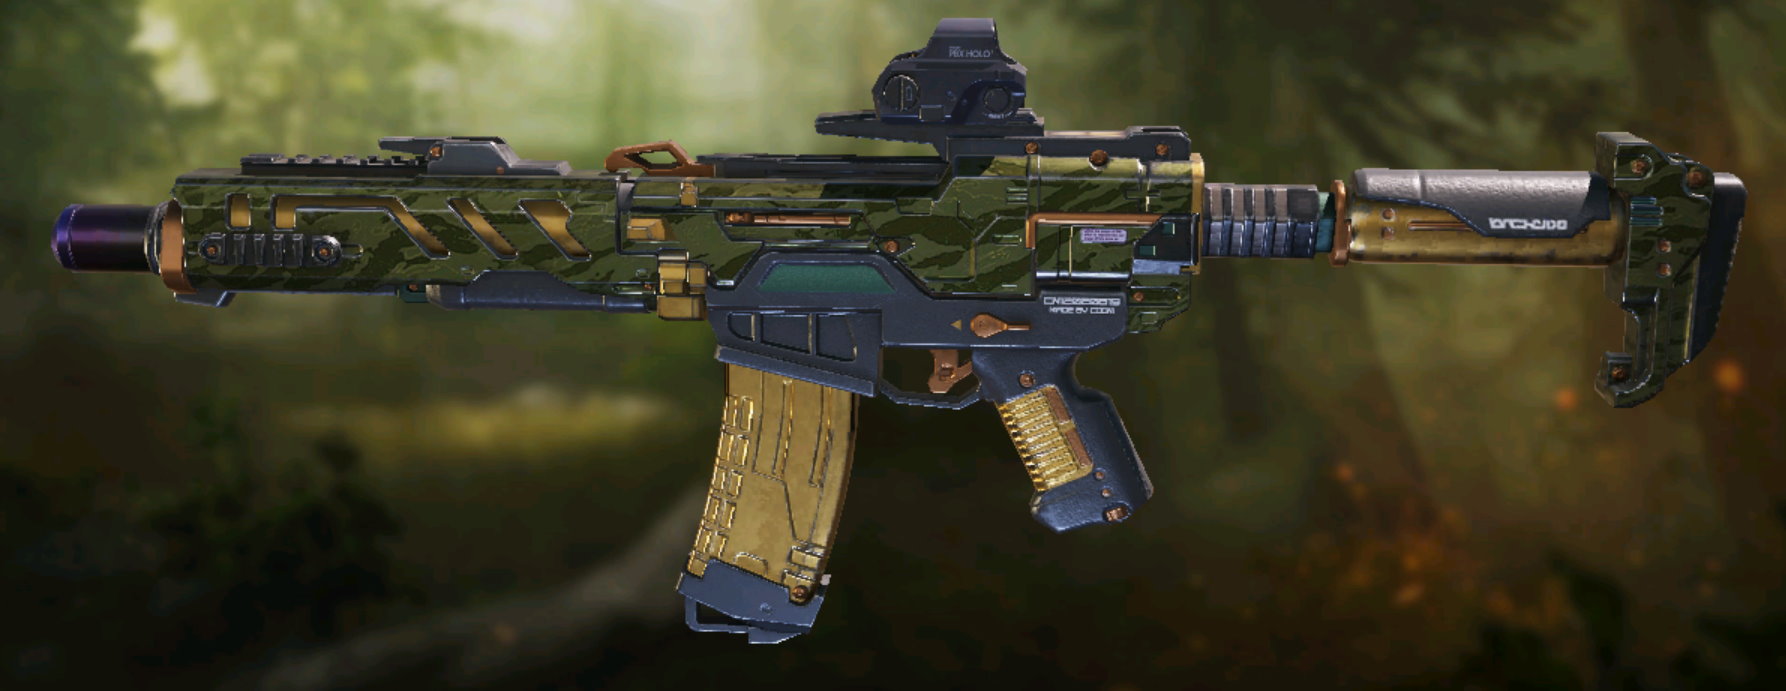 LK24 Backwoods, Epic camo in Call of Duty Mobile